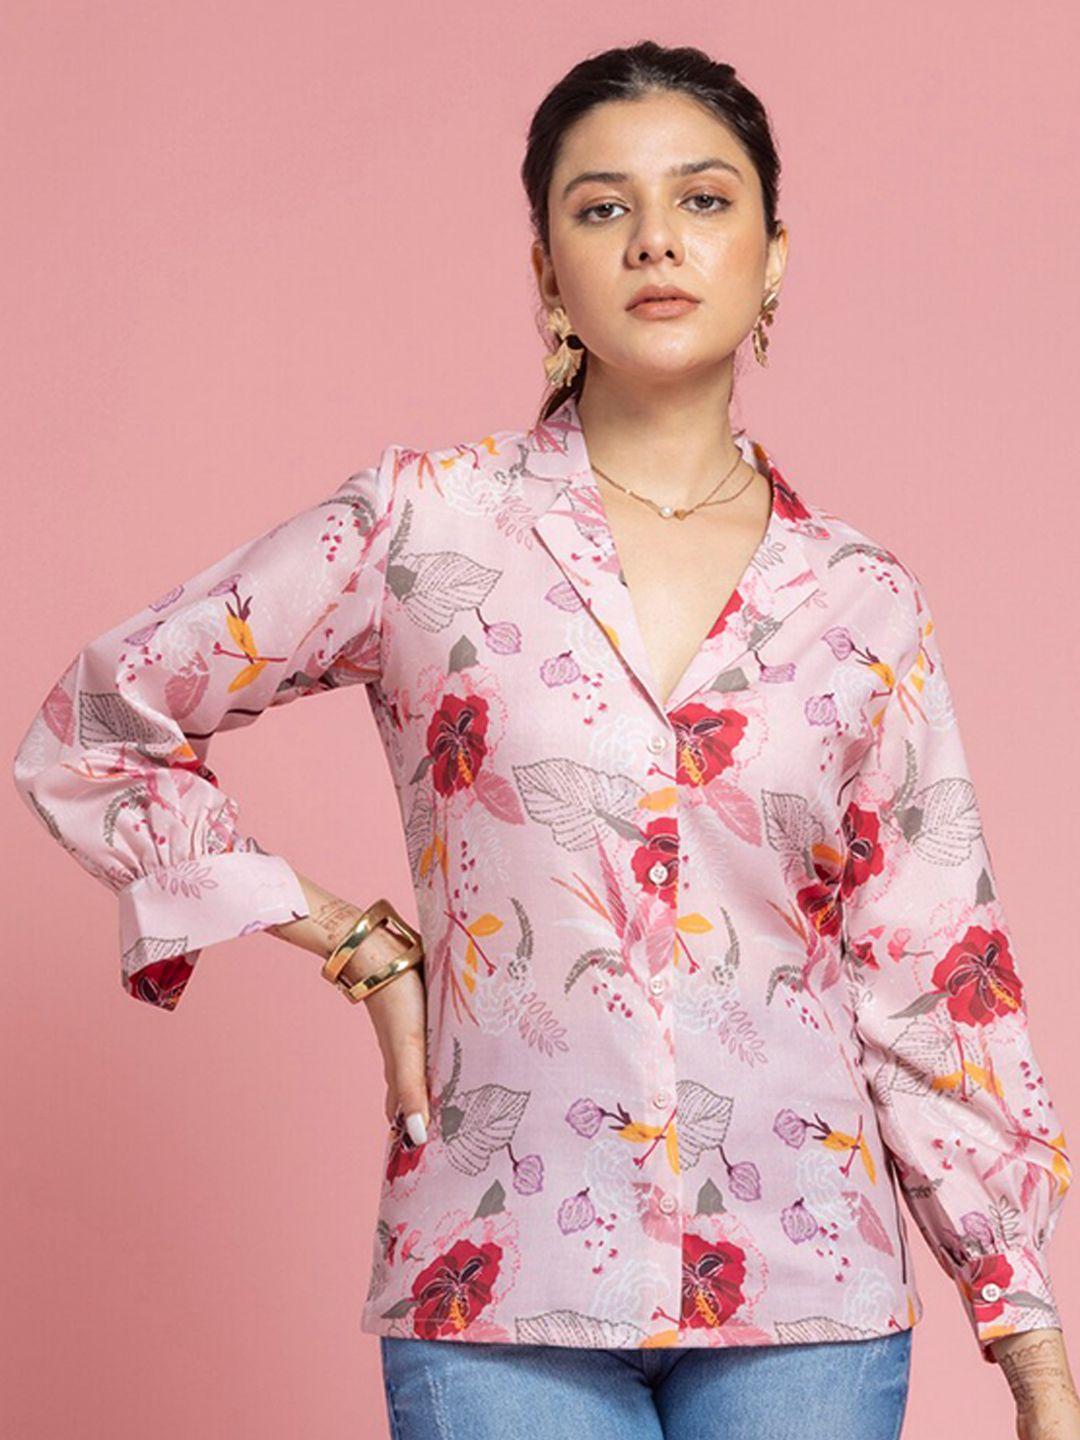 sew you soon pink floral print cotton shirt style top